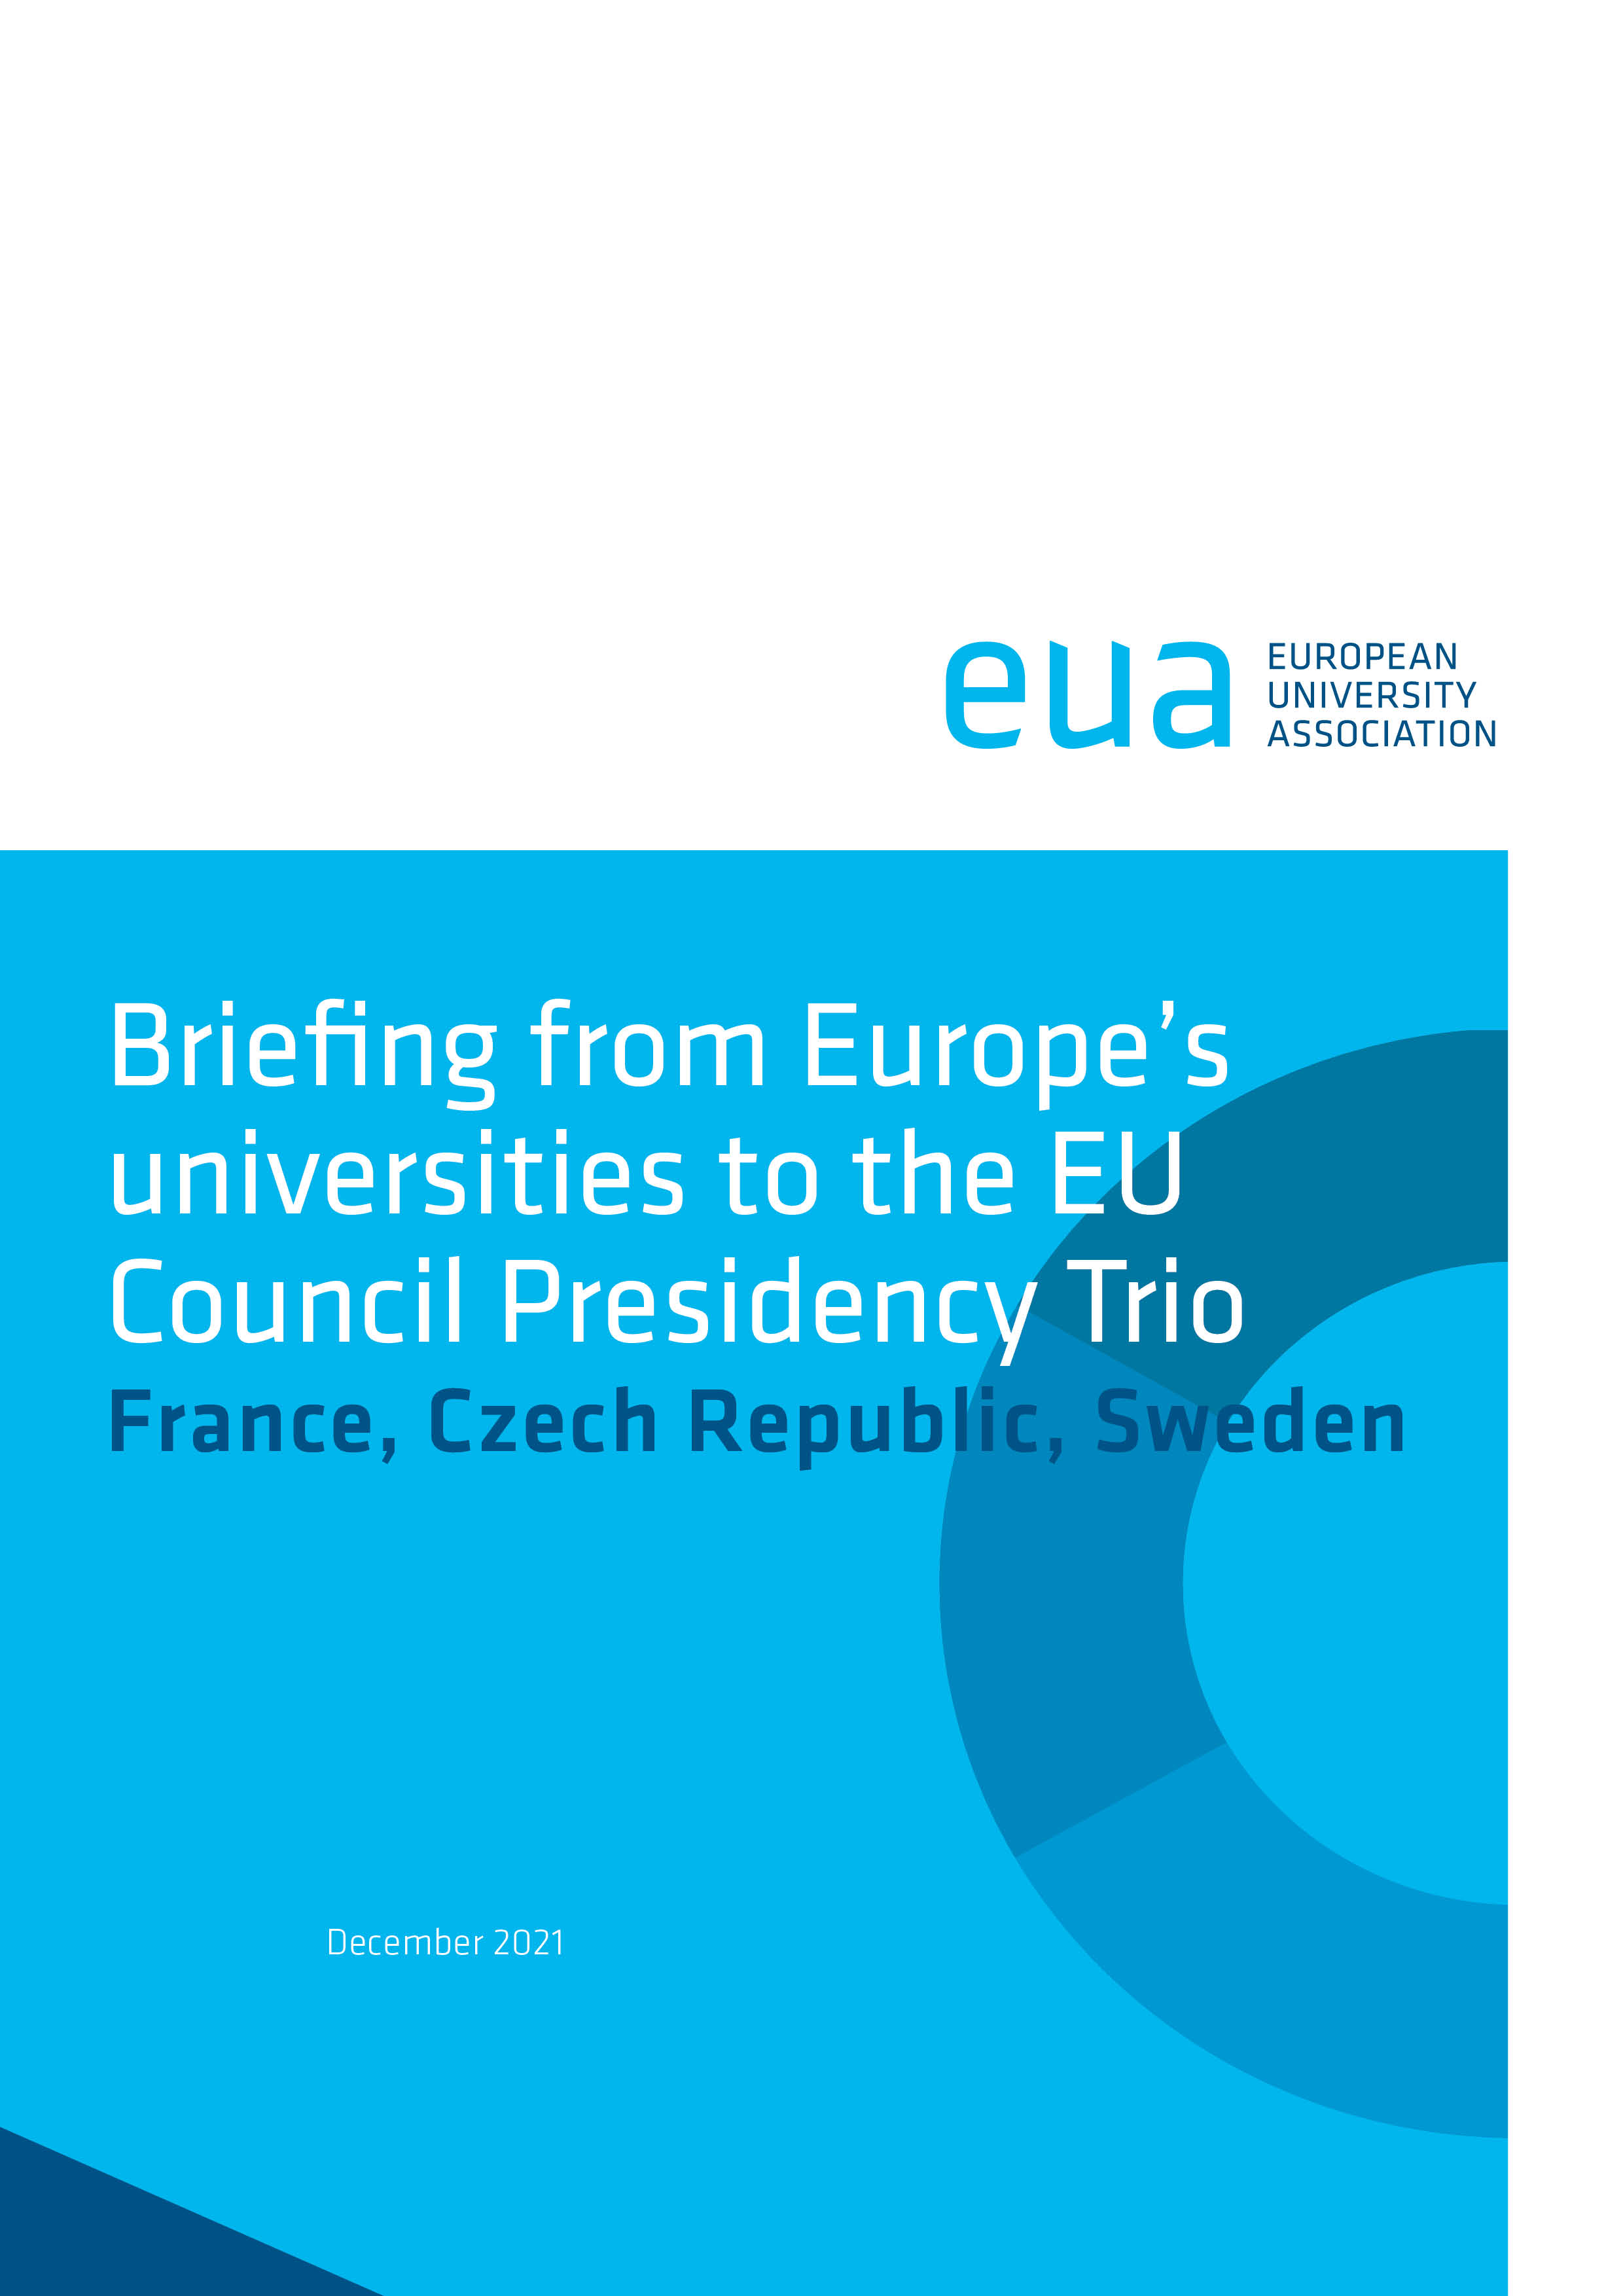 Briefing from Europe’s universities to the EU Council Presidency Trio – France, Czech Republic, Sweden